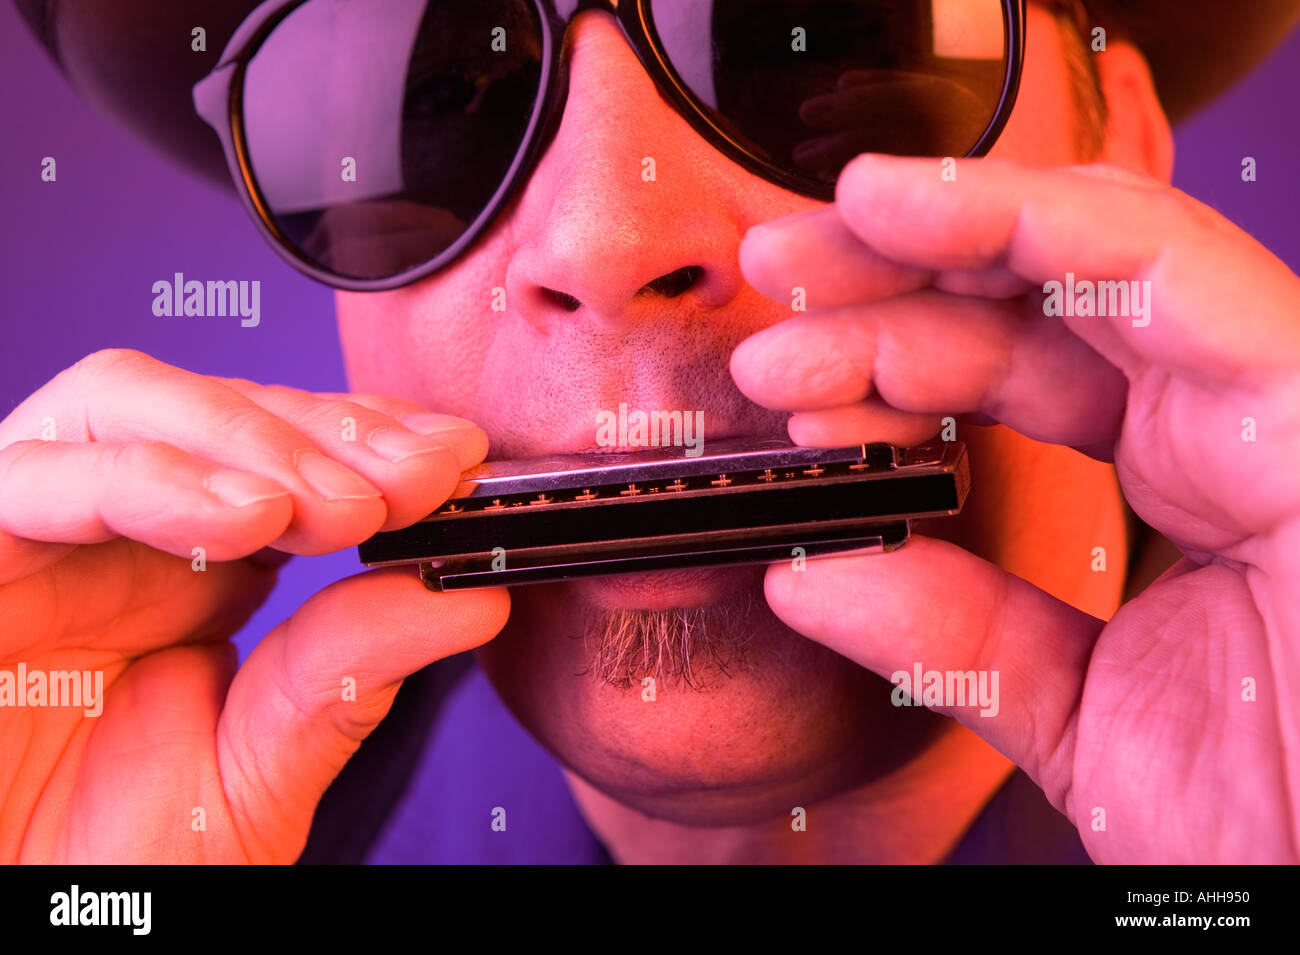 Close Up Of Hands Holding A Harmonica Stock Photo - Download Image Now -  Harmonica, Harmony, Blues Music - iStock